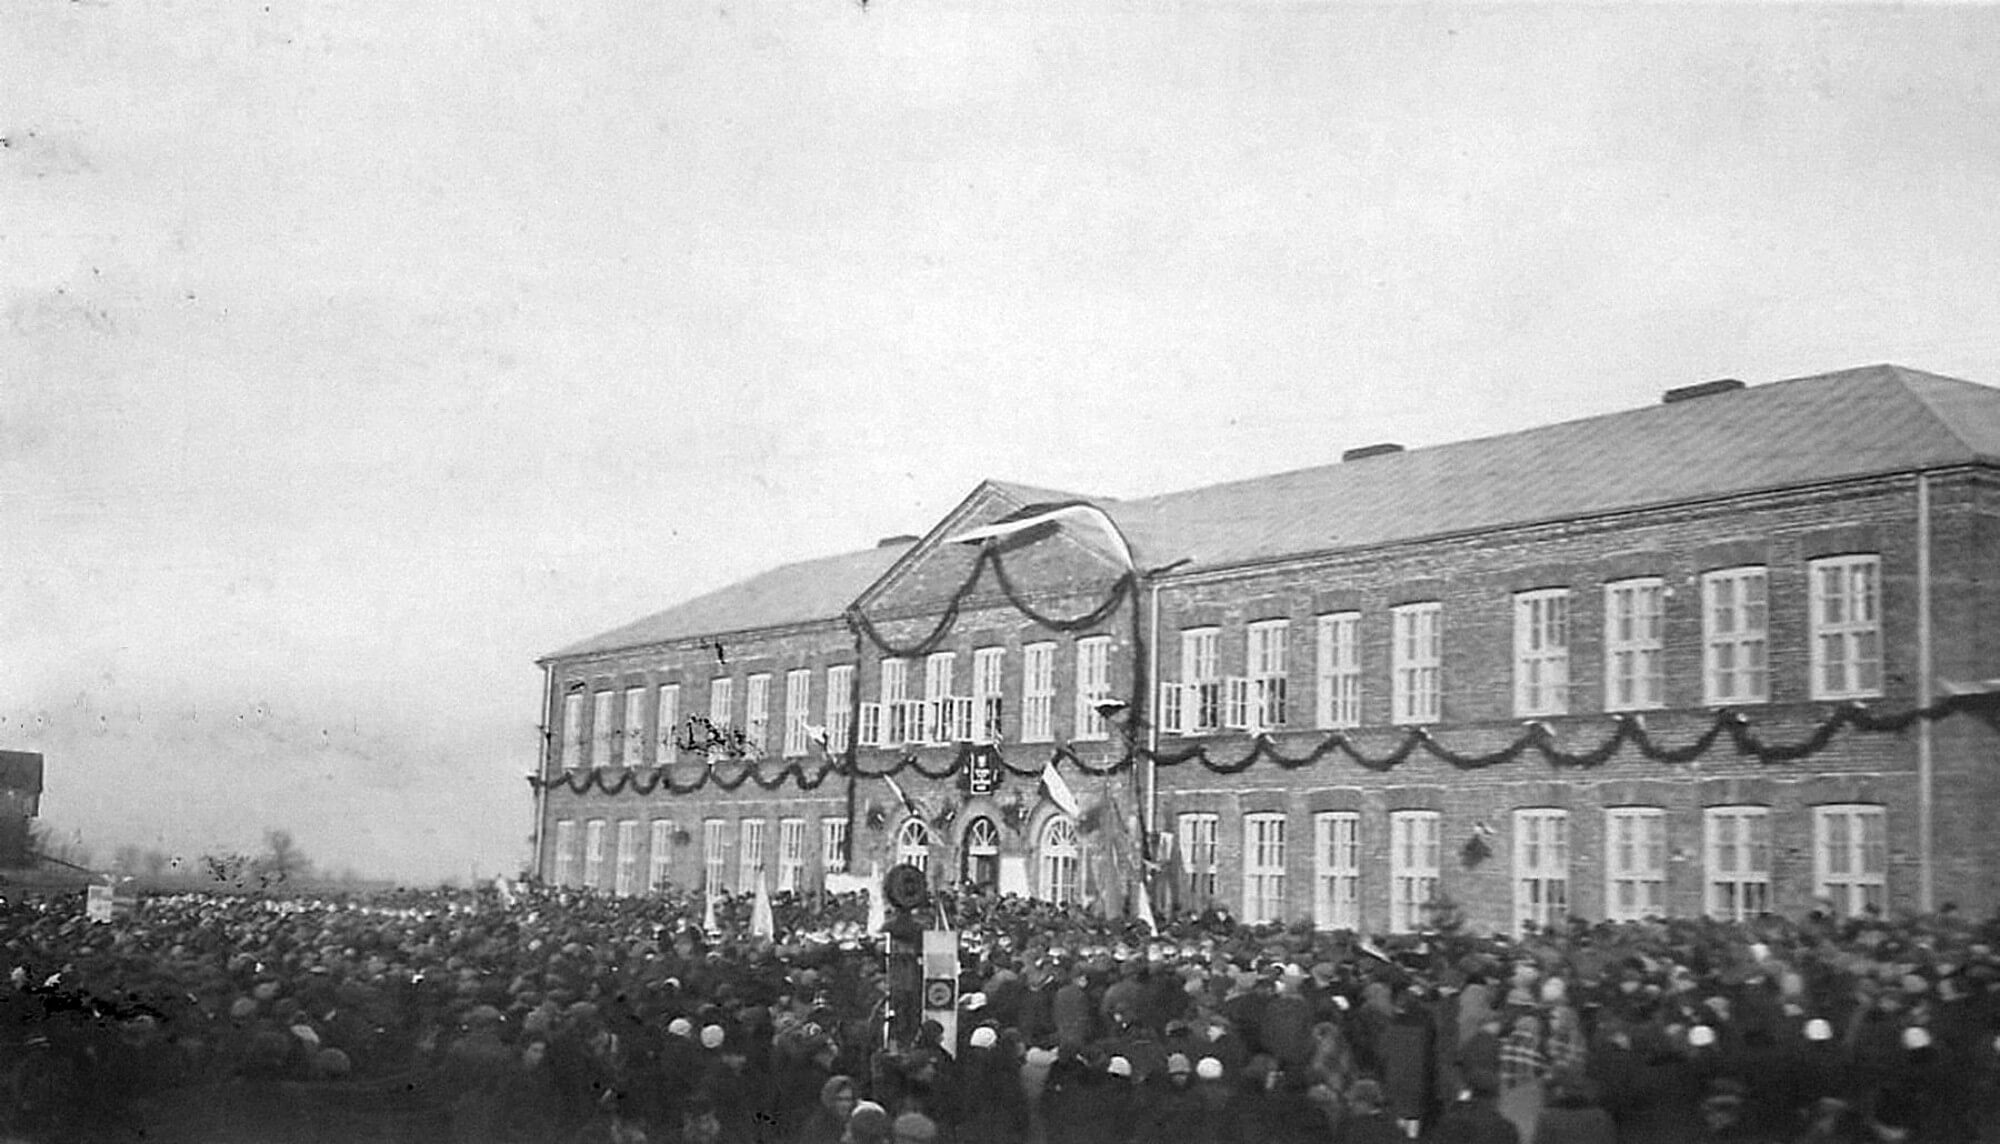 1930–School opening, photo, early 20th century